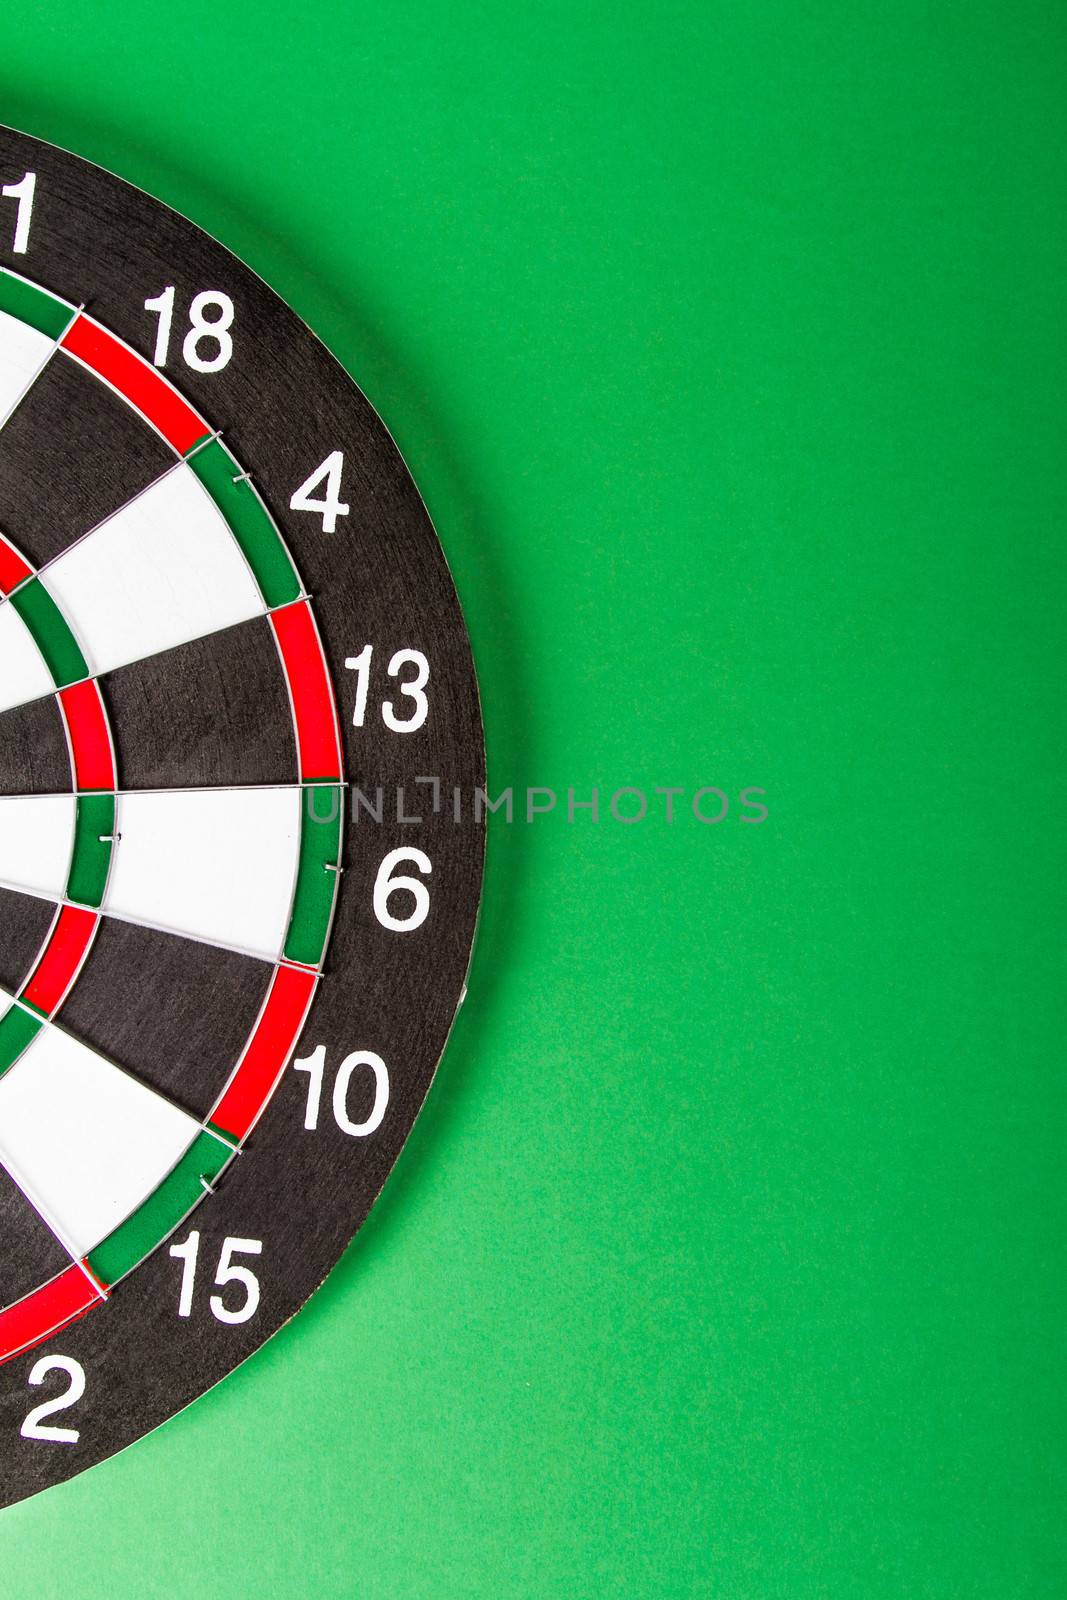 Dart board with black and white sections on green background.